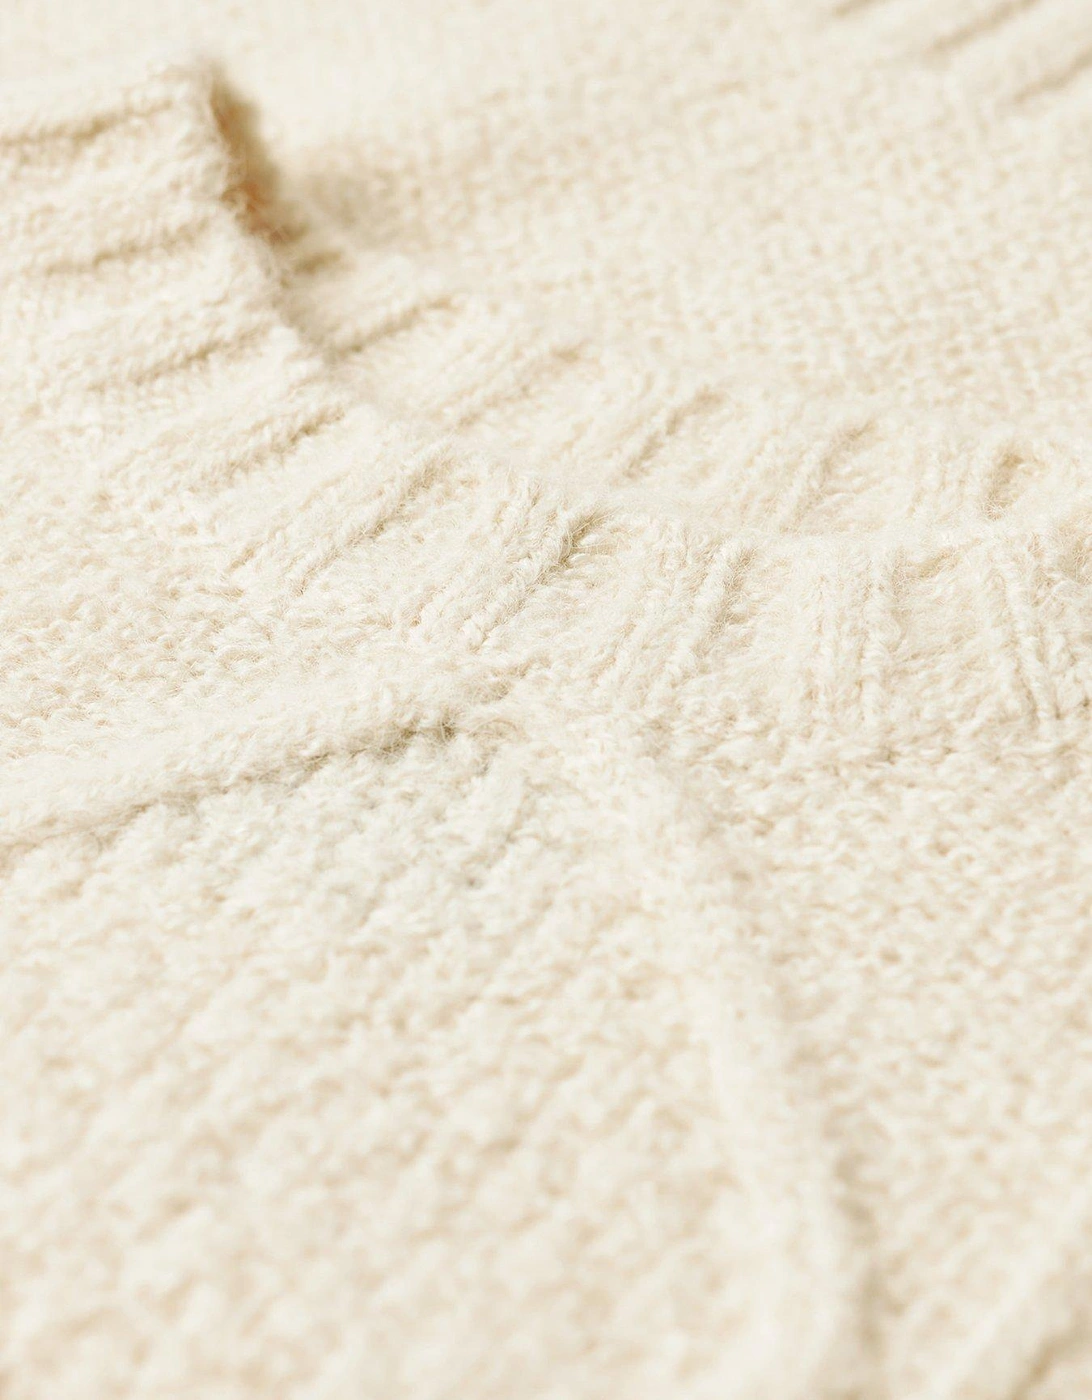 Chunky Cable Knit Jumper - Cream